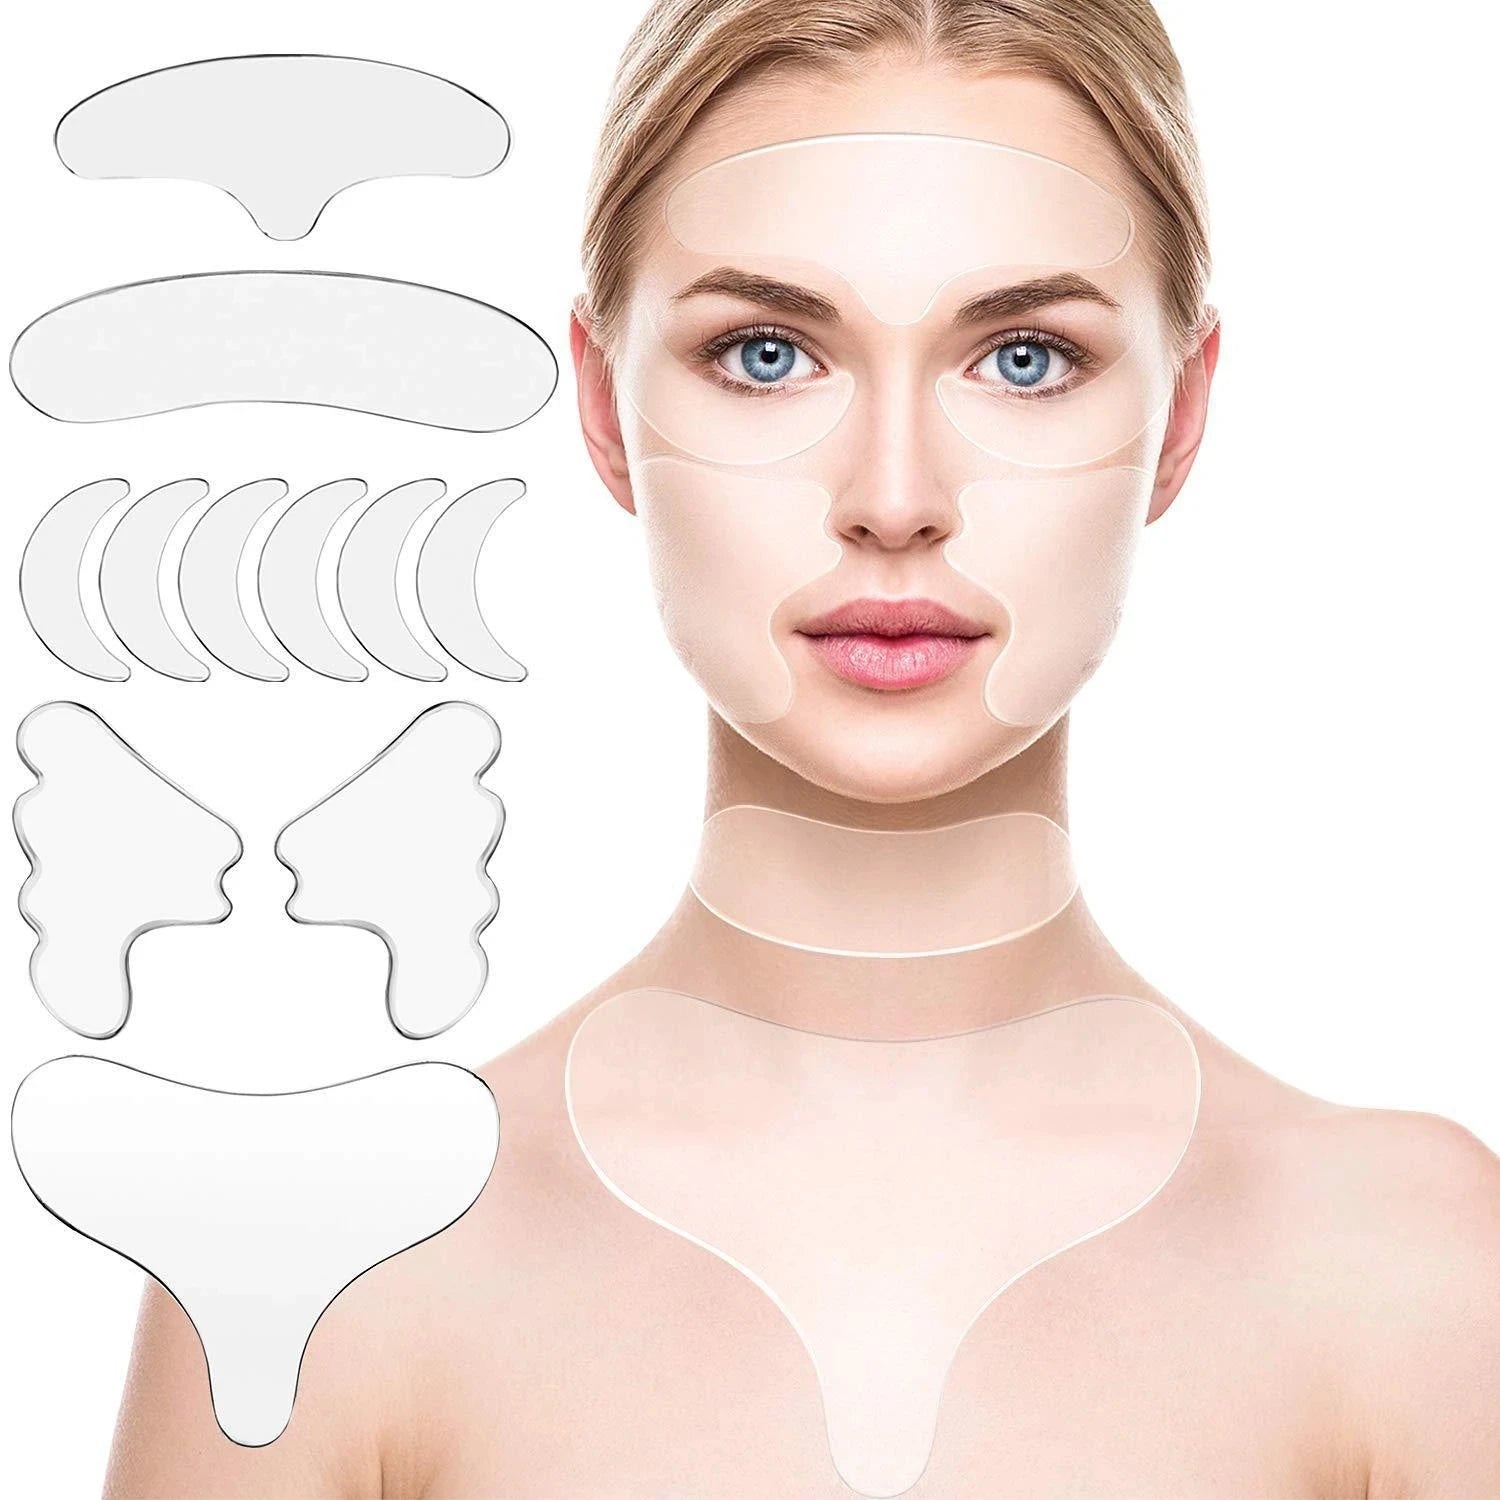 Reusable Anti Wrinkle Eye Chin Forehead Skin Care Pads 100% Medical Grade Silicone Reusable Face Lifting Invisible Patches  beautylum.com   